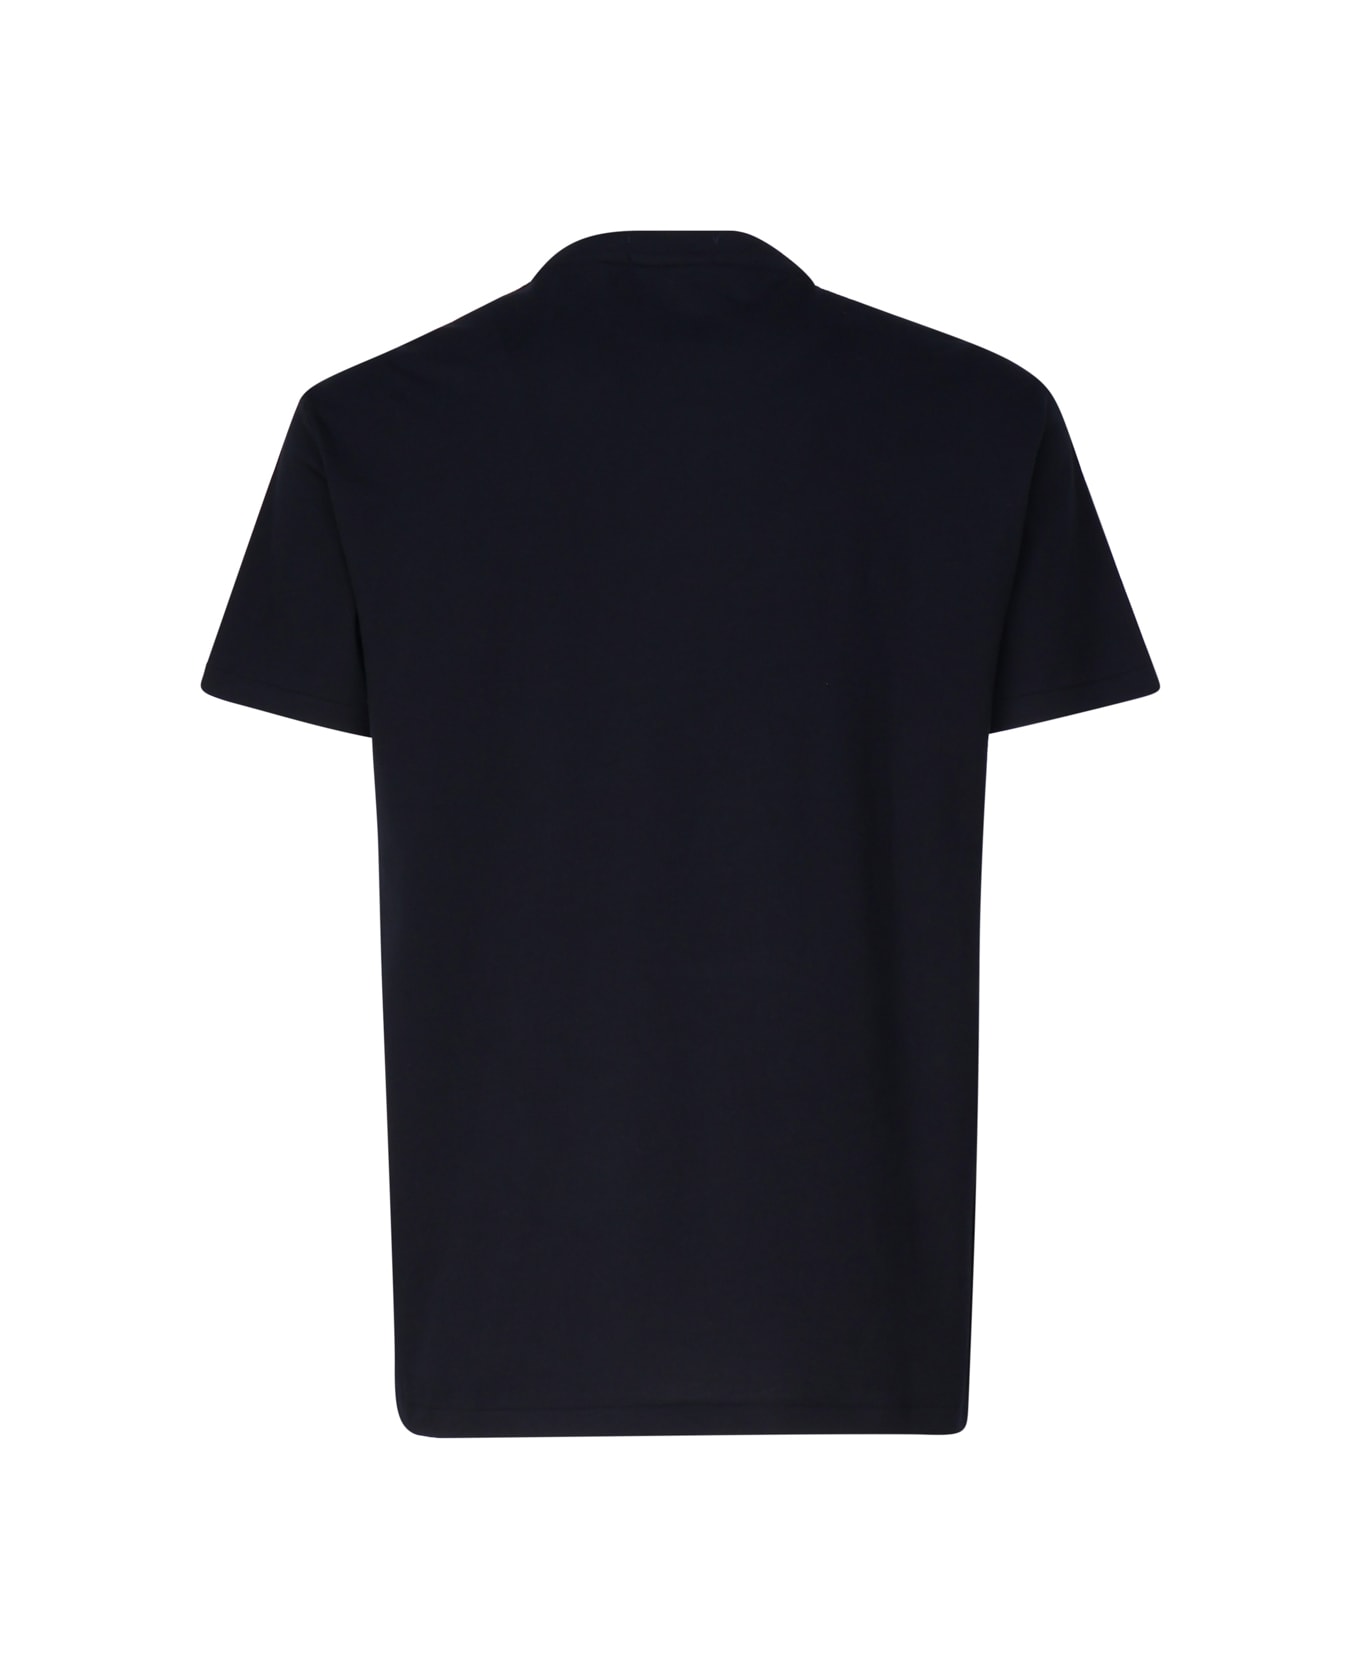 Polo Ralph Lauren T-shirt With Embroidery - Blue シャツ